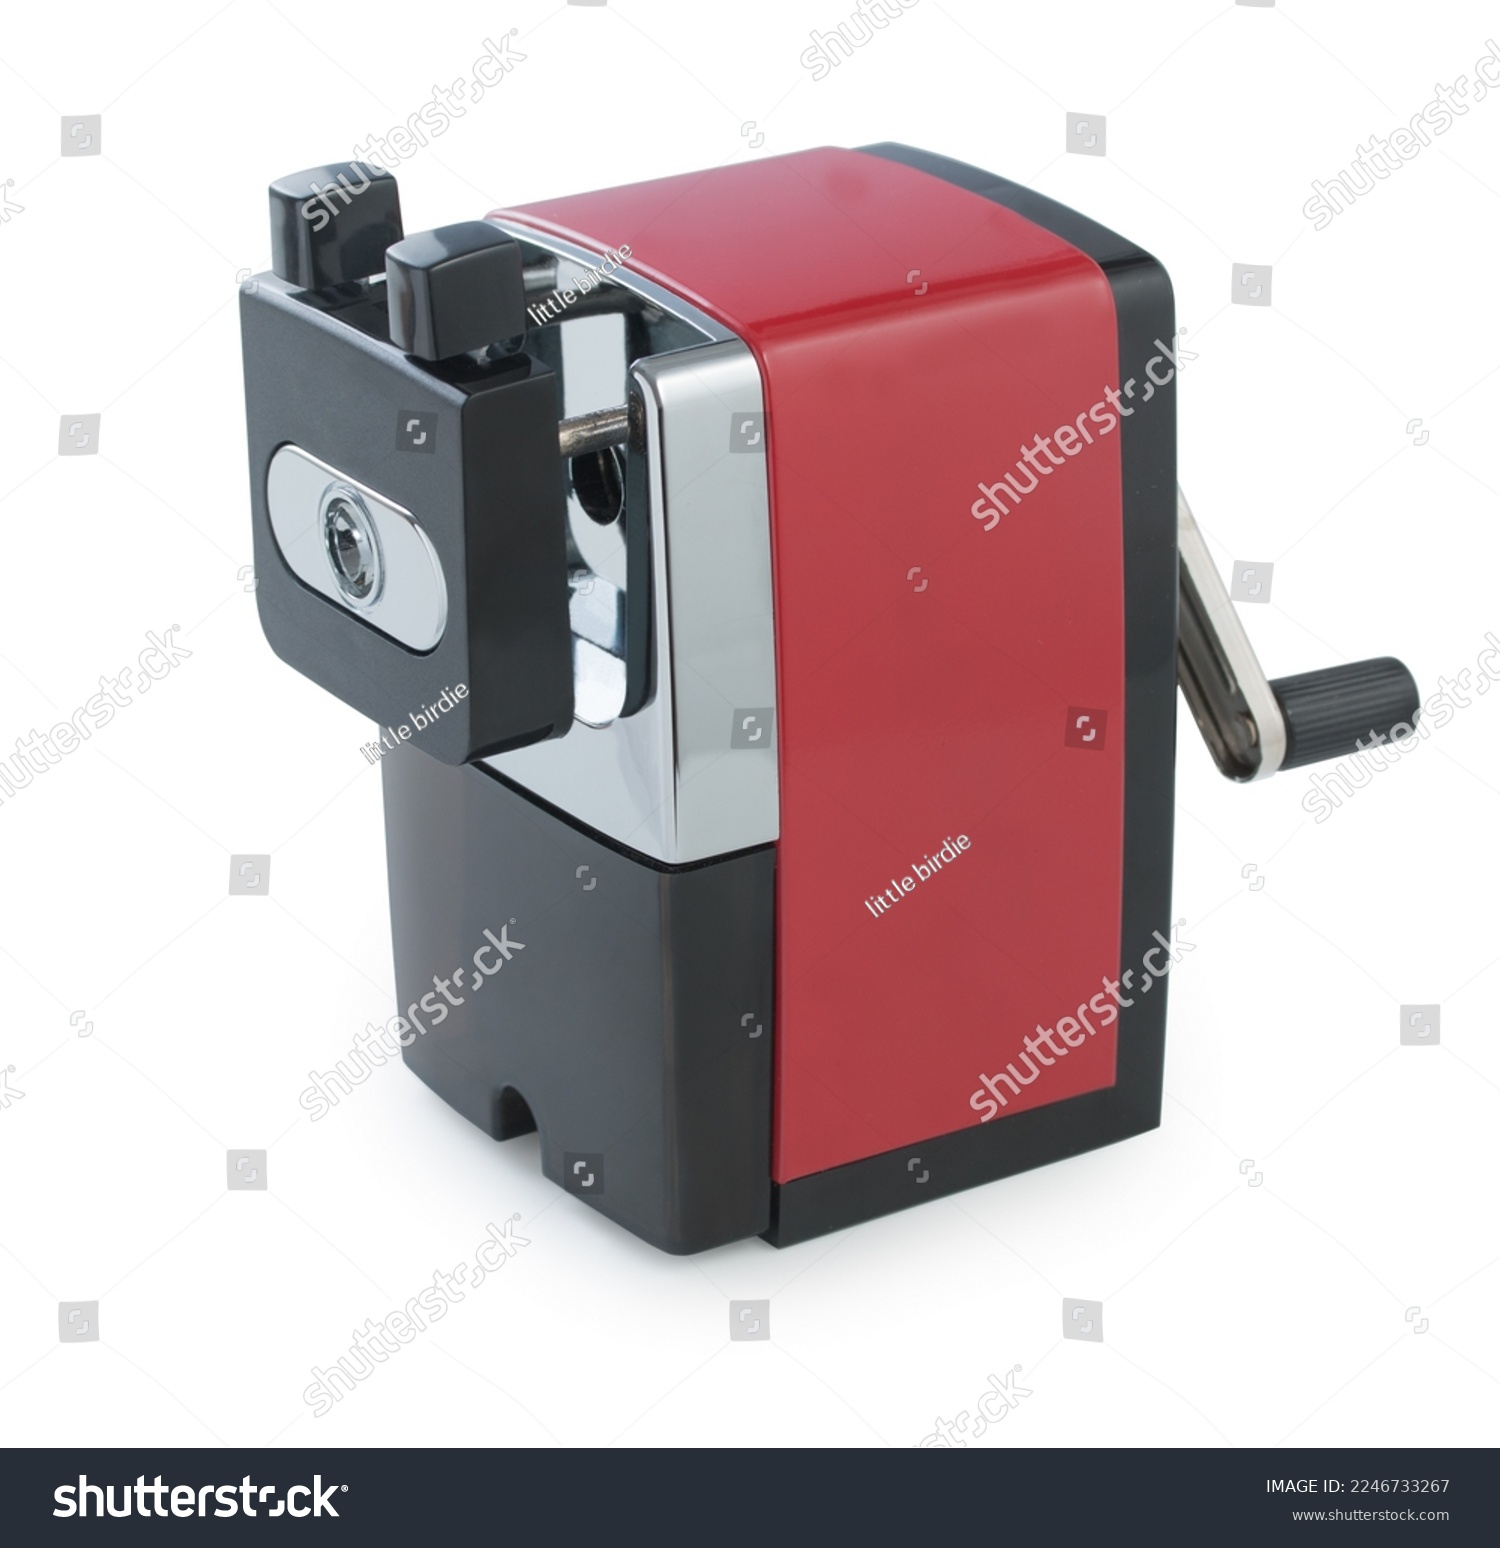 Red mechanical pencil sharpener isolated on a white background. #2246733267